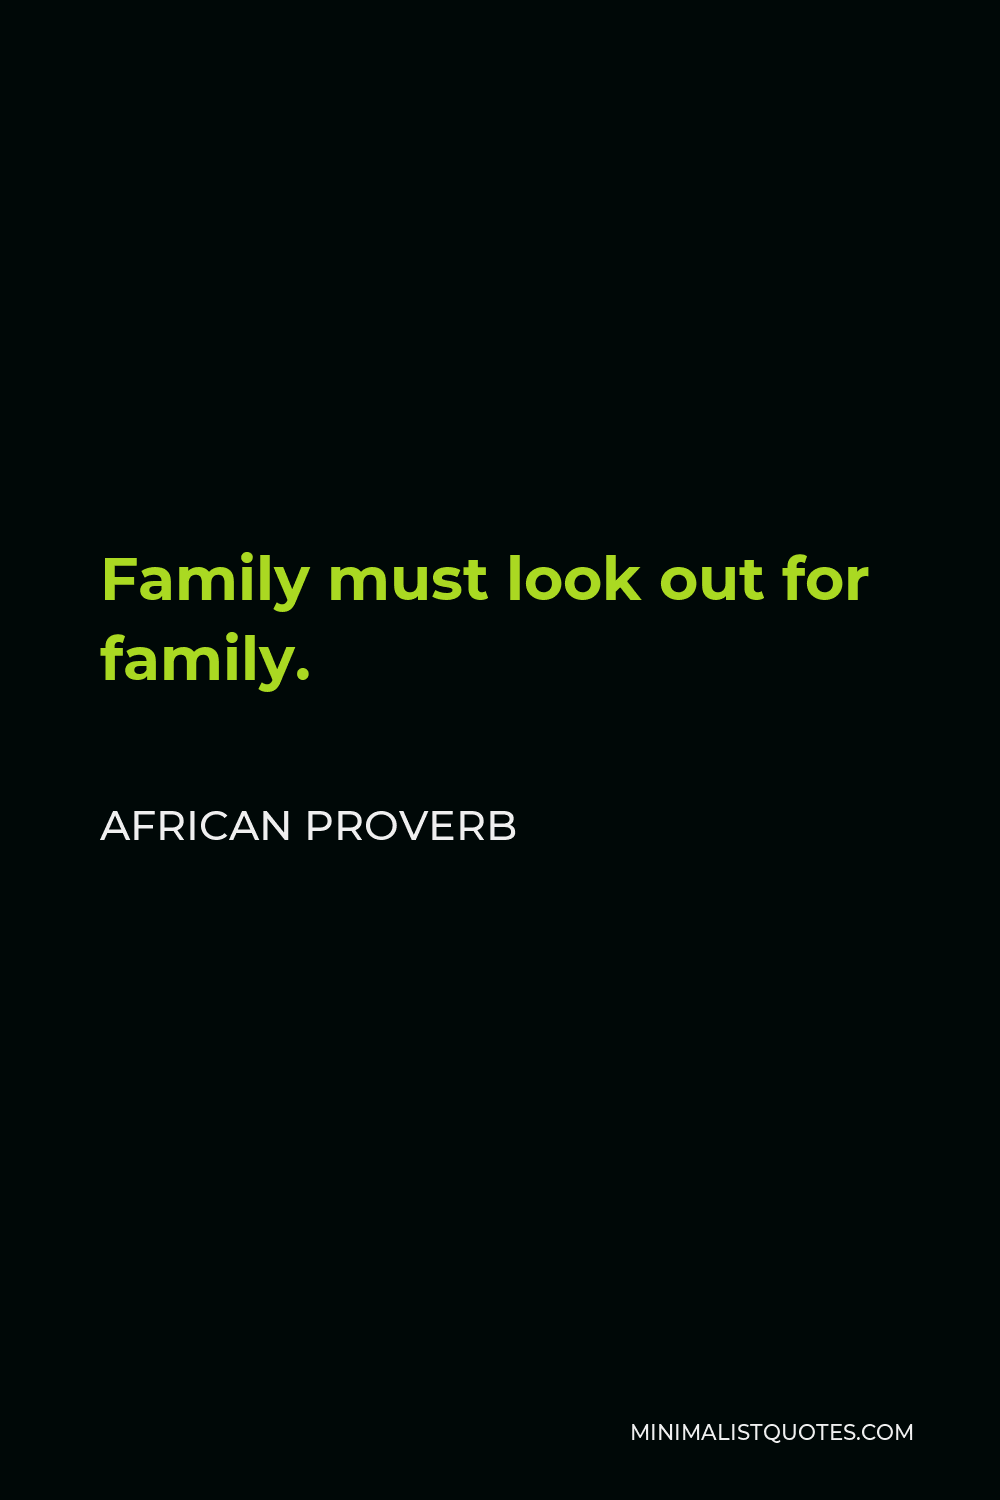 African Proverb Quote - Family must look out for family.